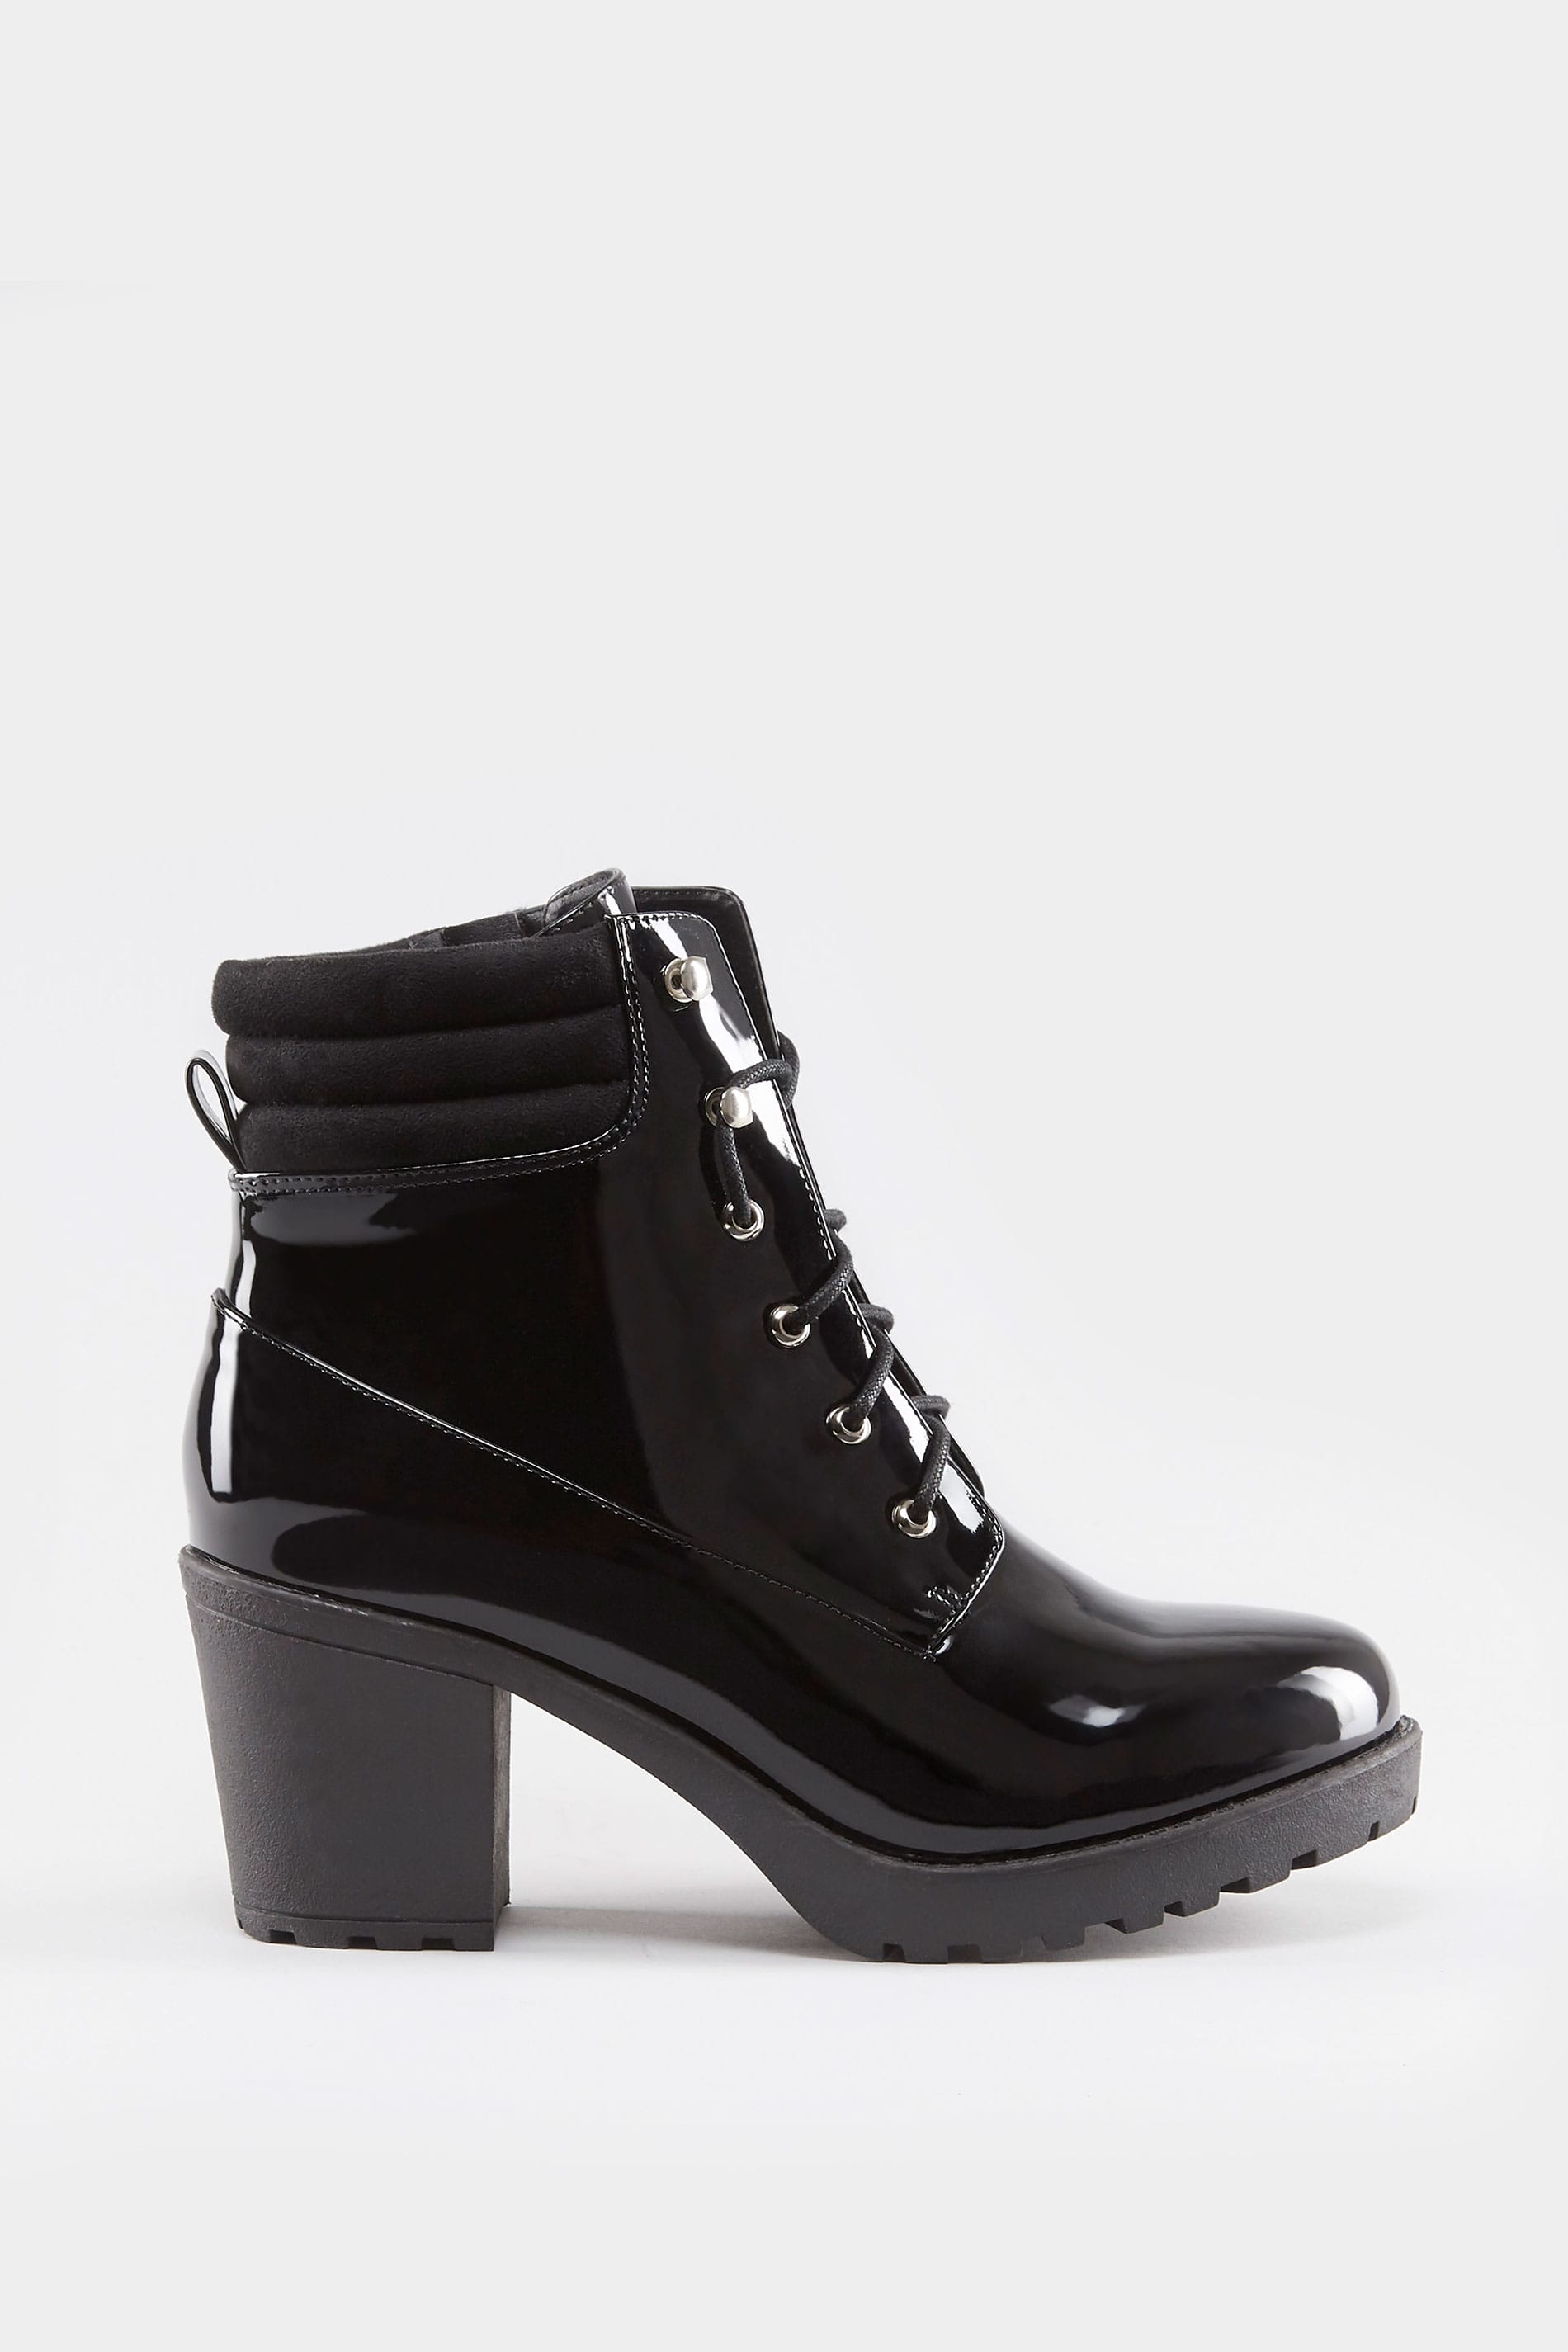 Black Patent Lace Up Heeled Ankle Boot In EEE Fit, Wide Fitting Sizes ...